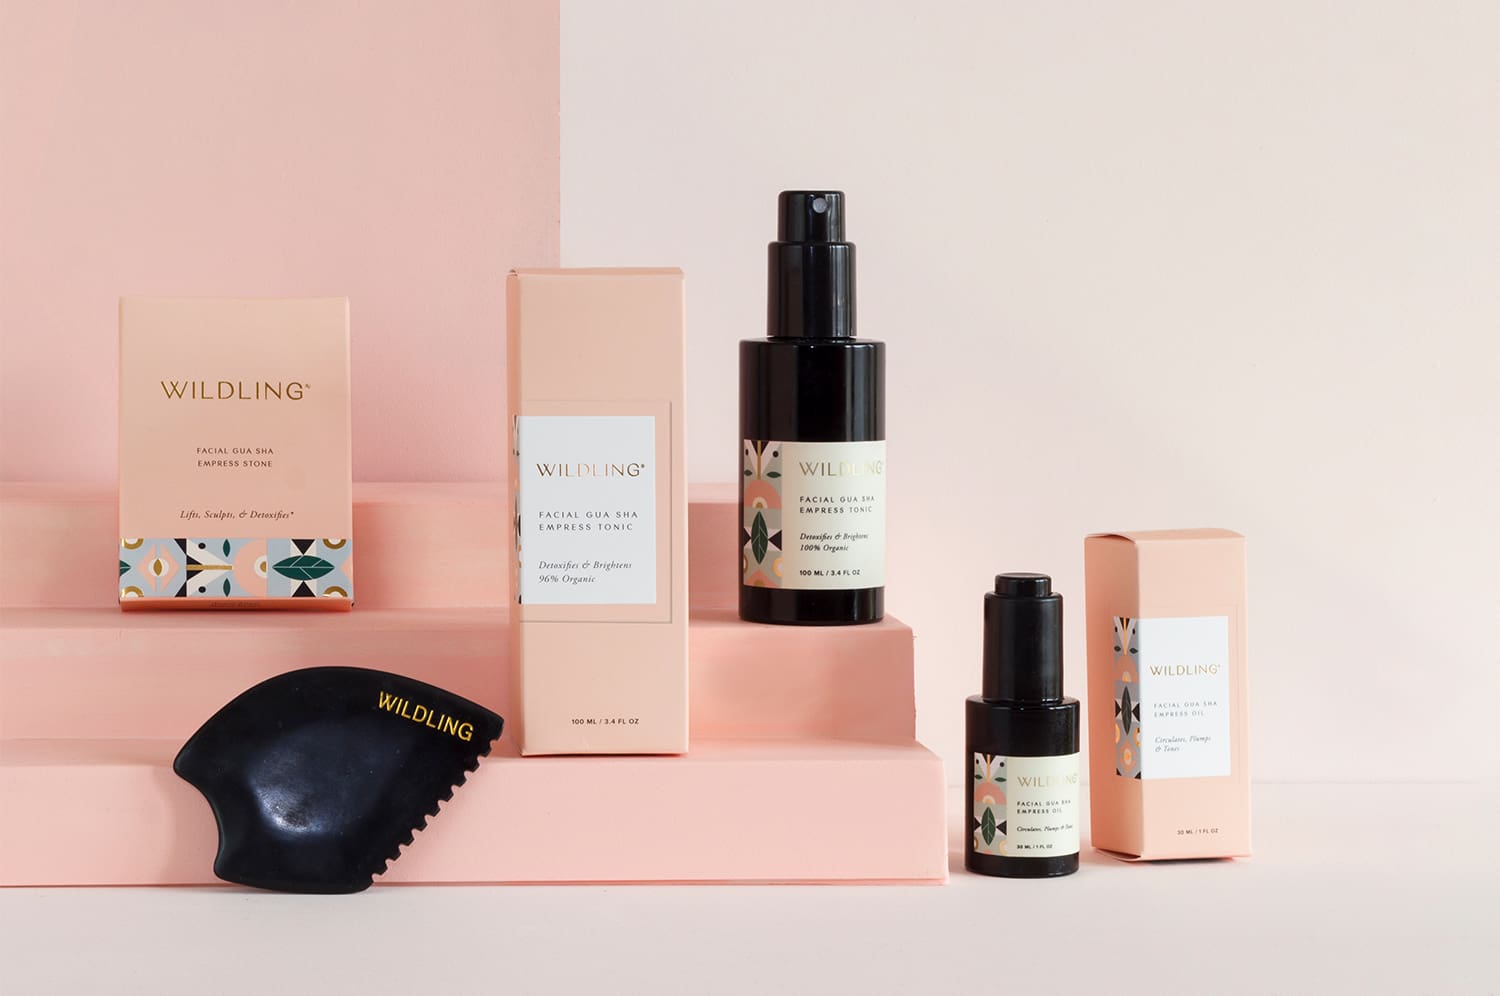 Wildling beauty products and packaging